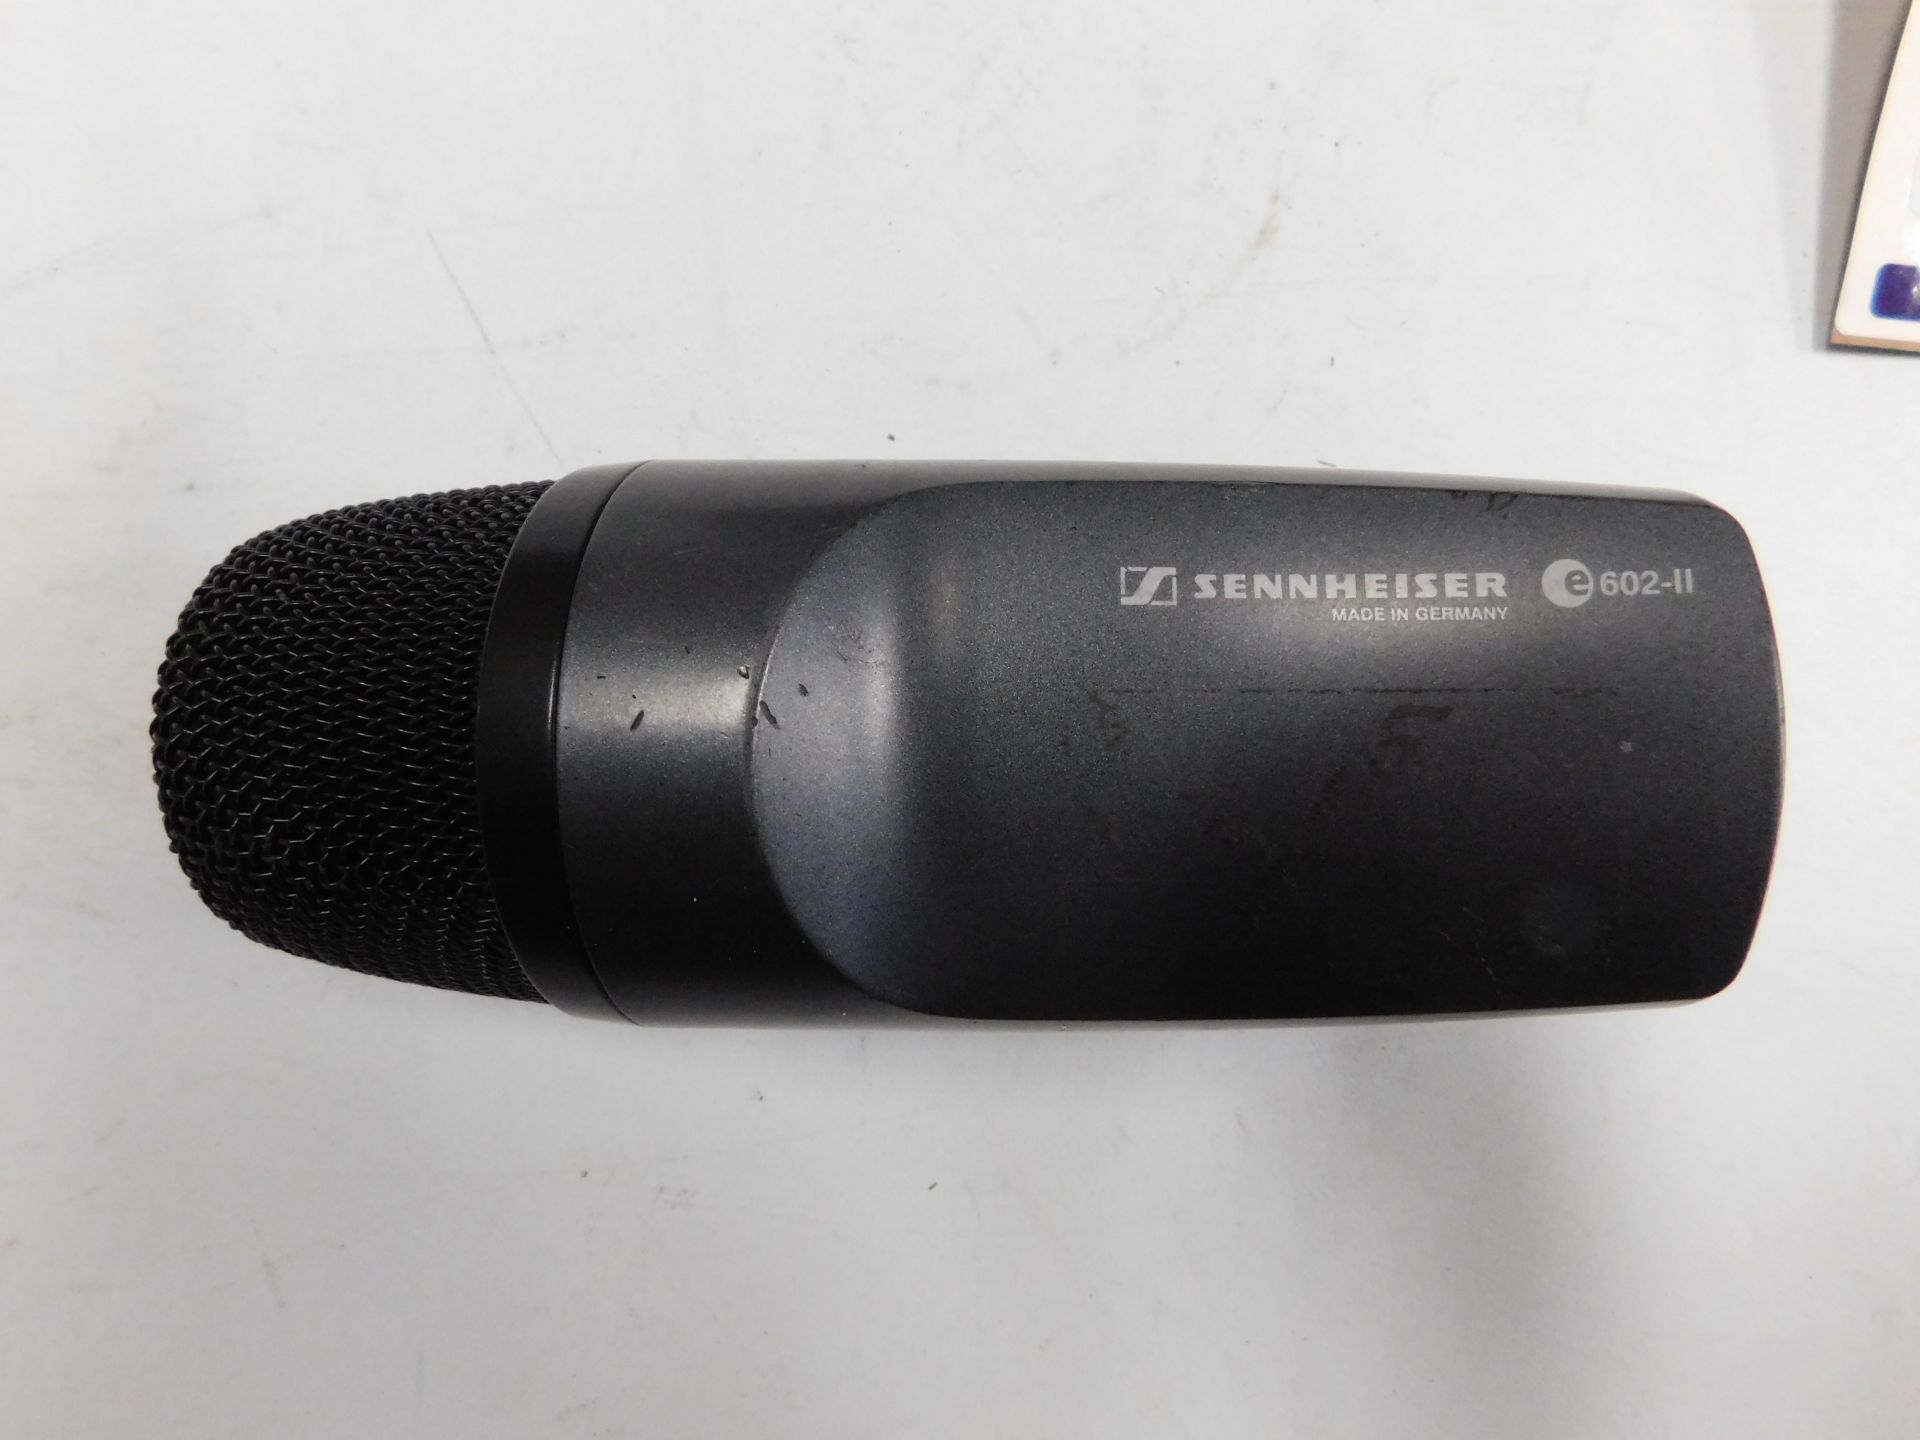 4 Sennheiser e604 Microphones & Sennheiser e602-11 Microphone (Location: Brentwood. Please Refer - Image 2 of 3